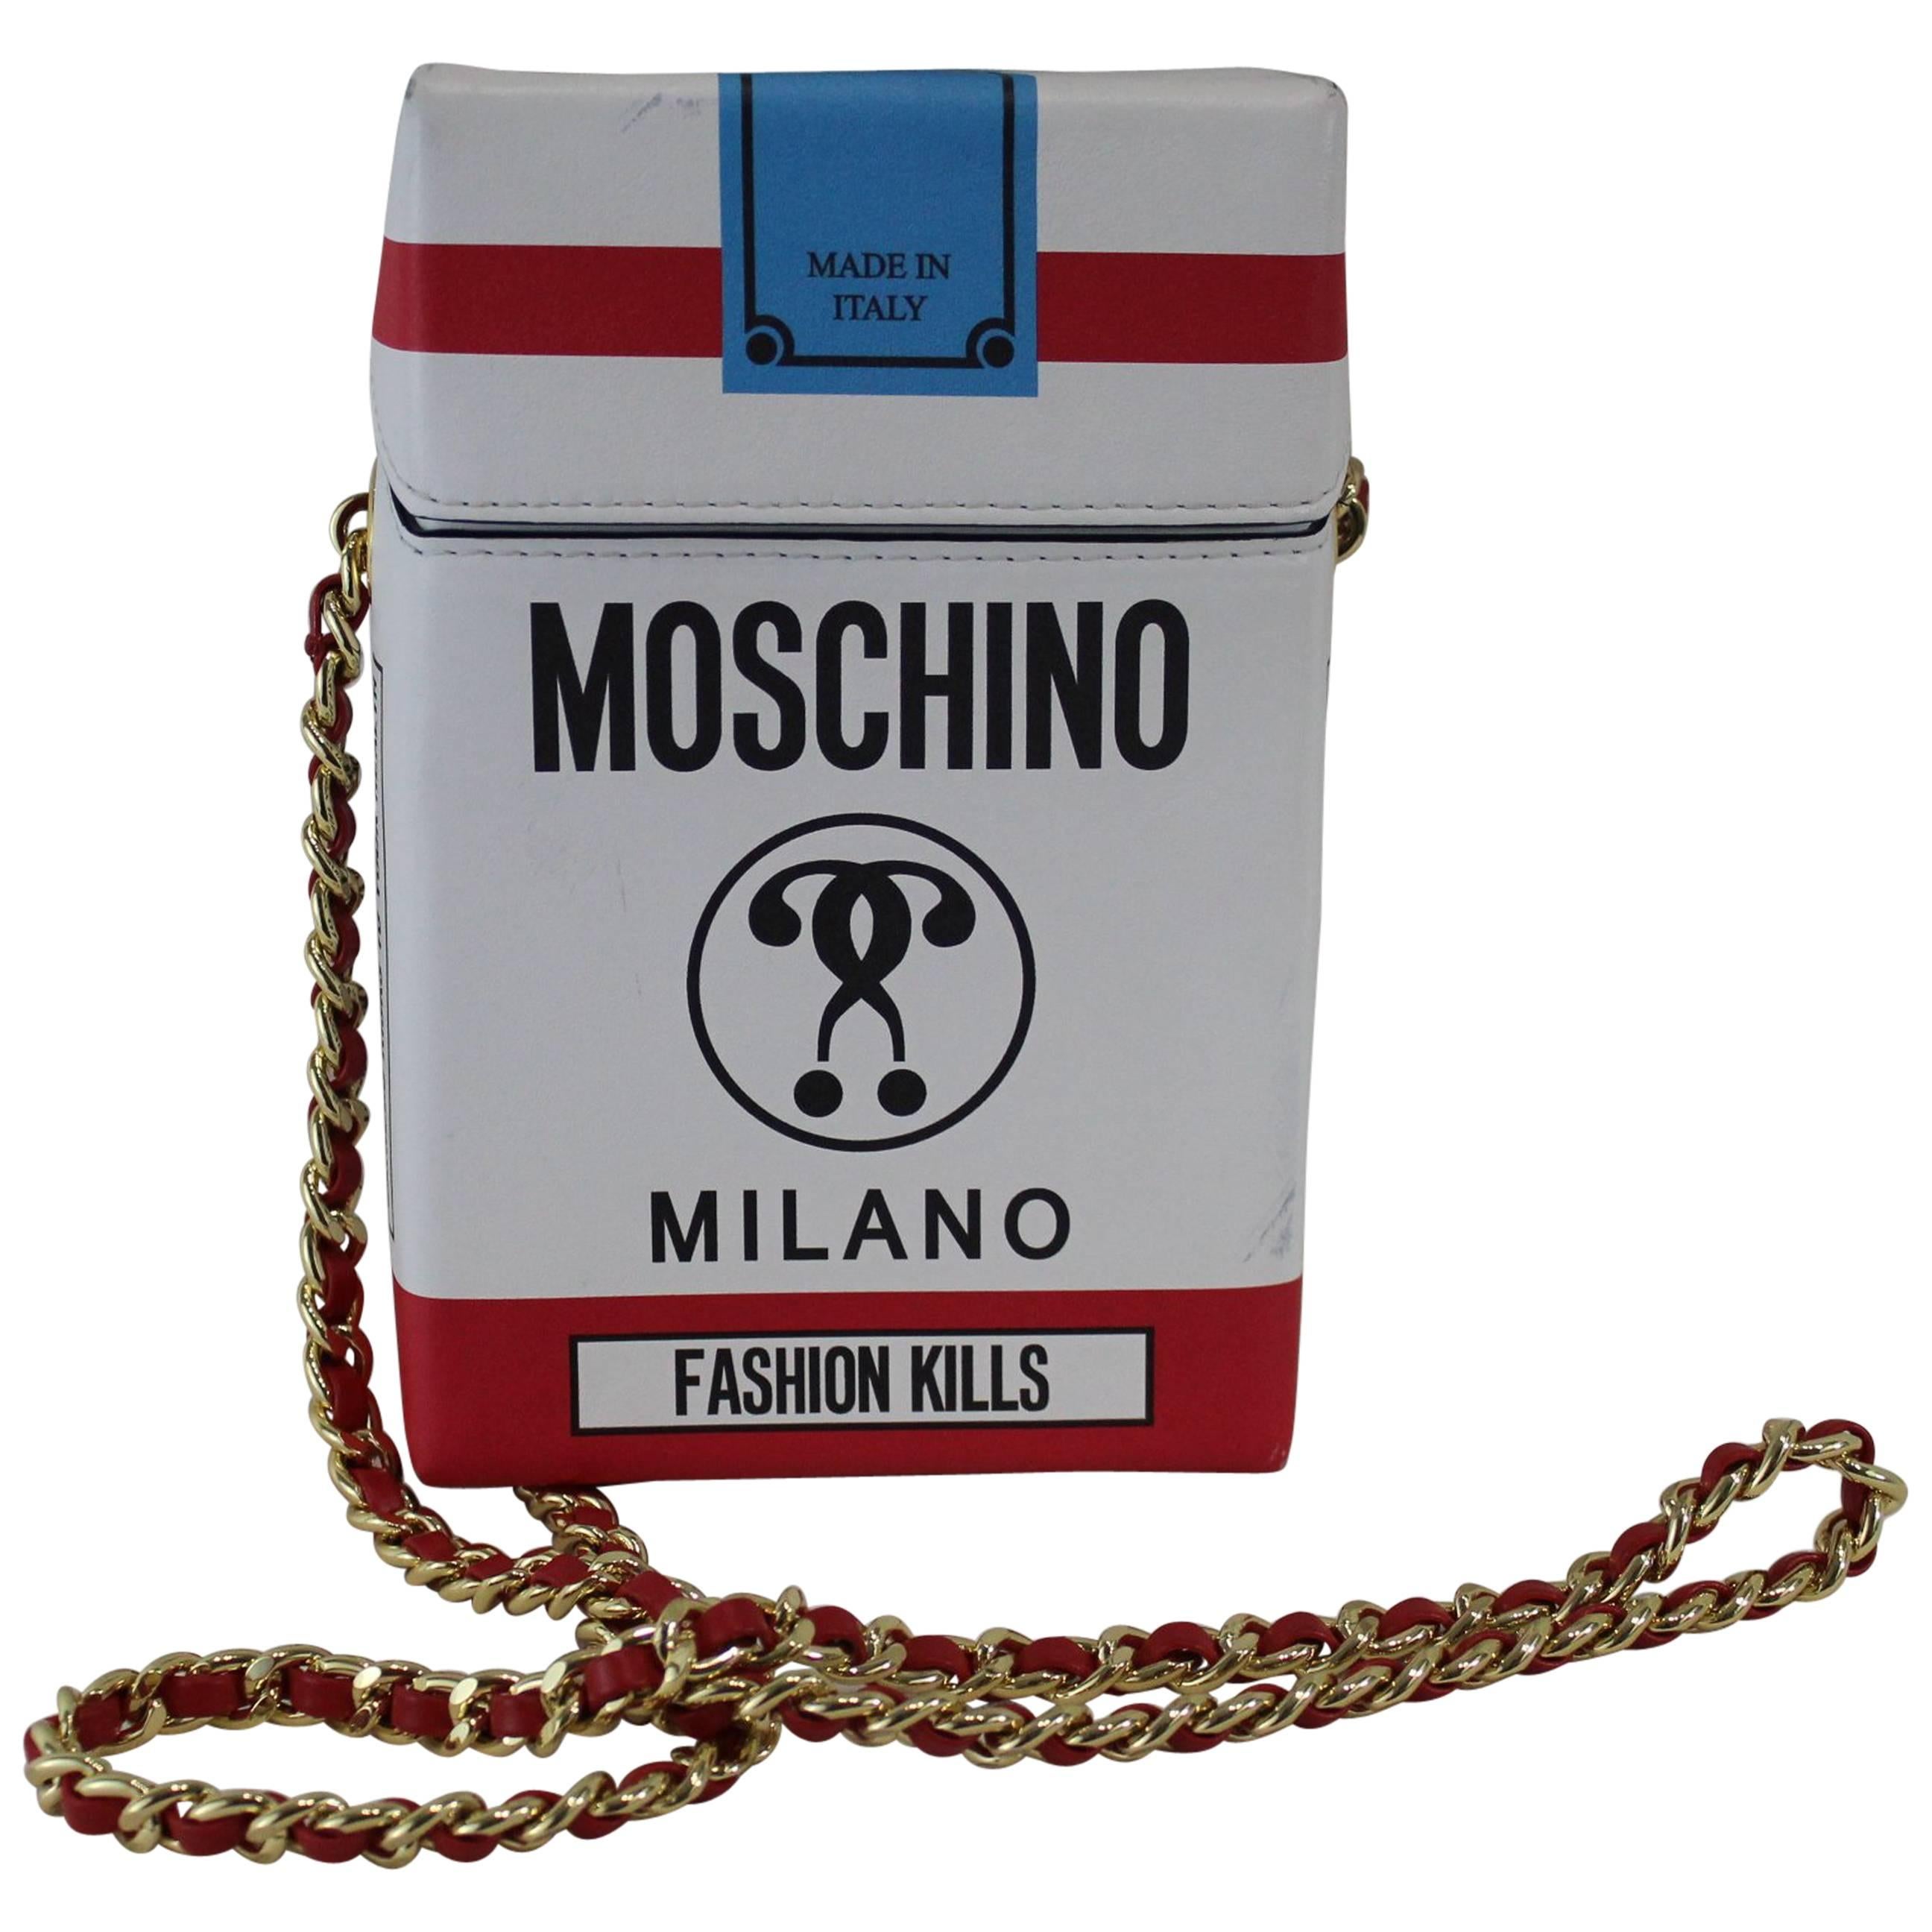 Moschino "Fashion Kills" Bag. Totally Sold Out